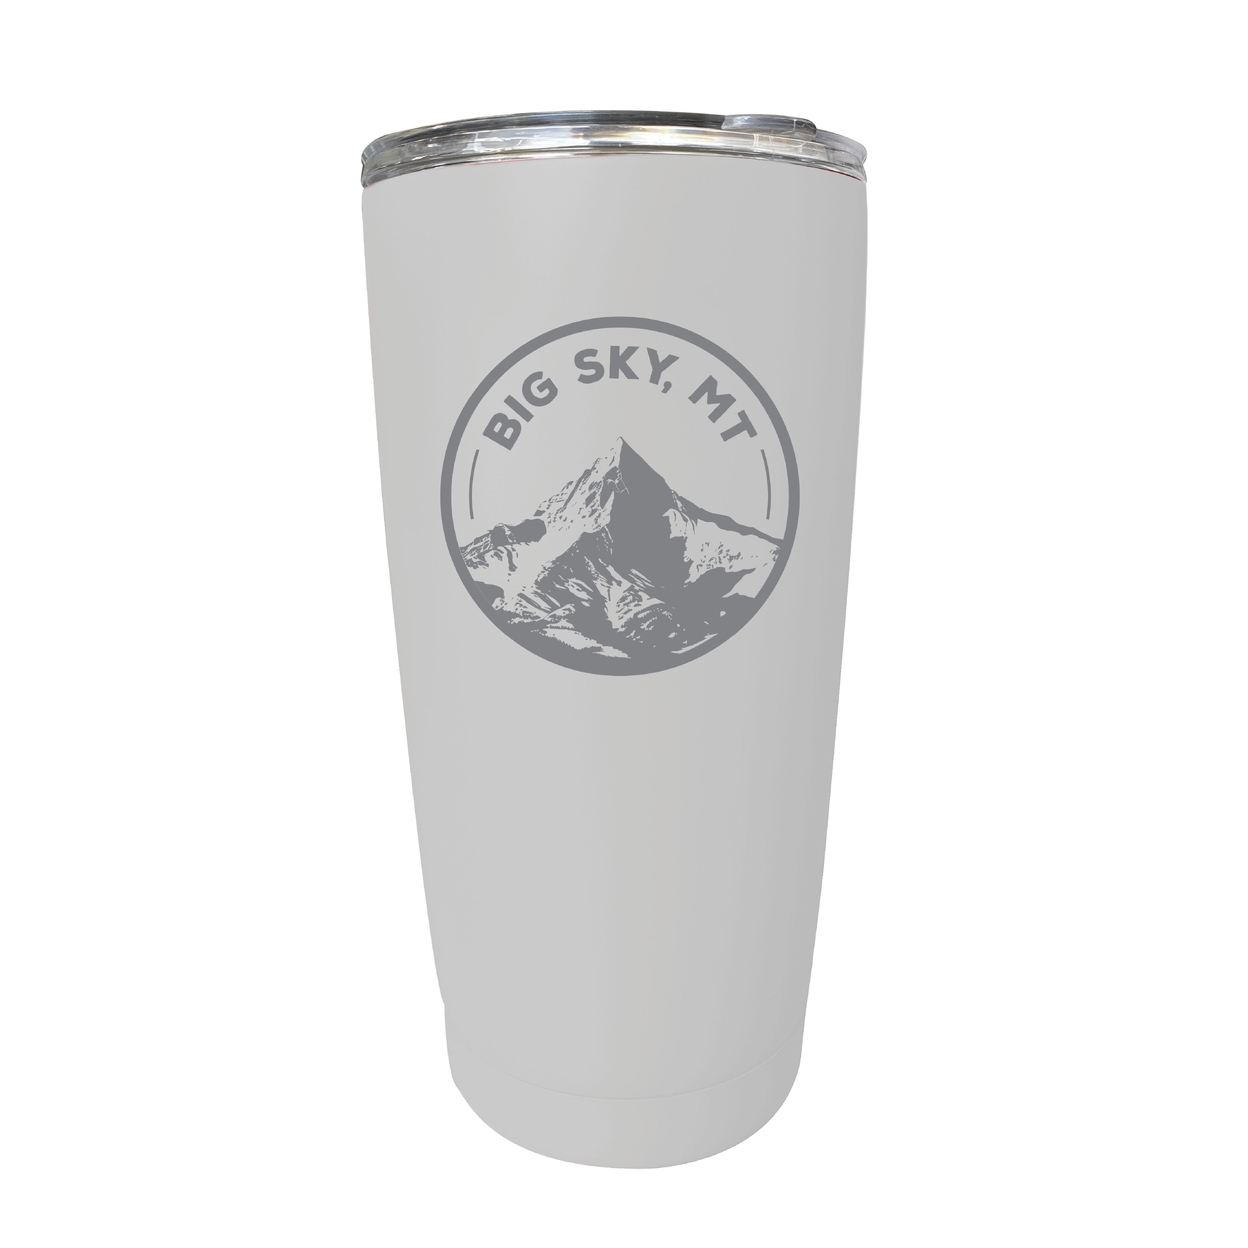 Big Sky Montana Souvenir 16 Oz Engraved Stainless Steel Insulated Tumbler - White,,2-Pack